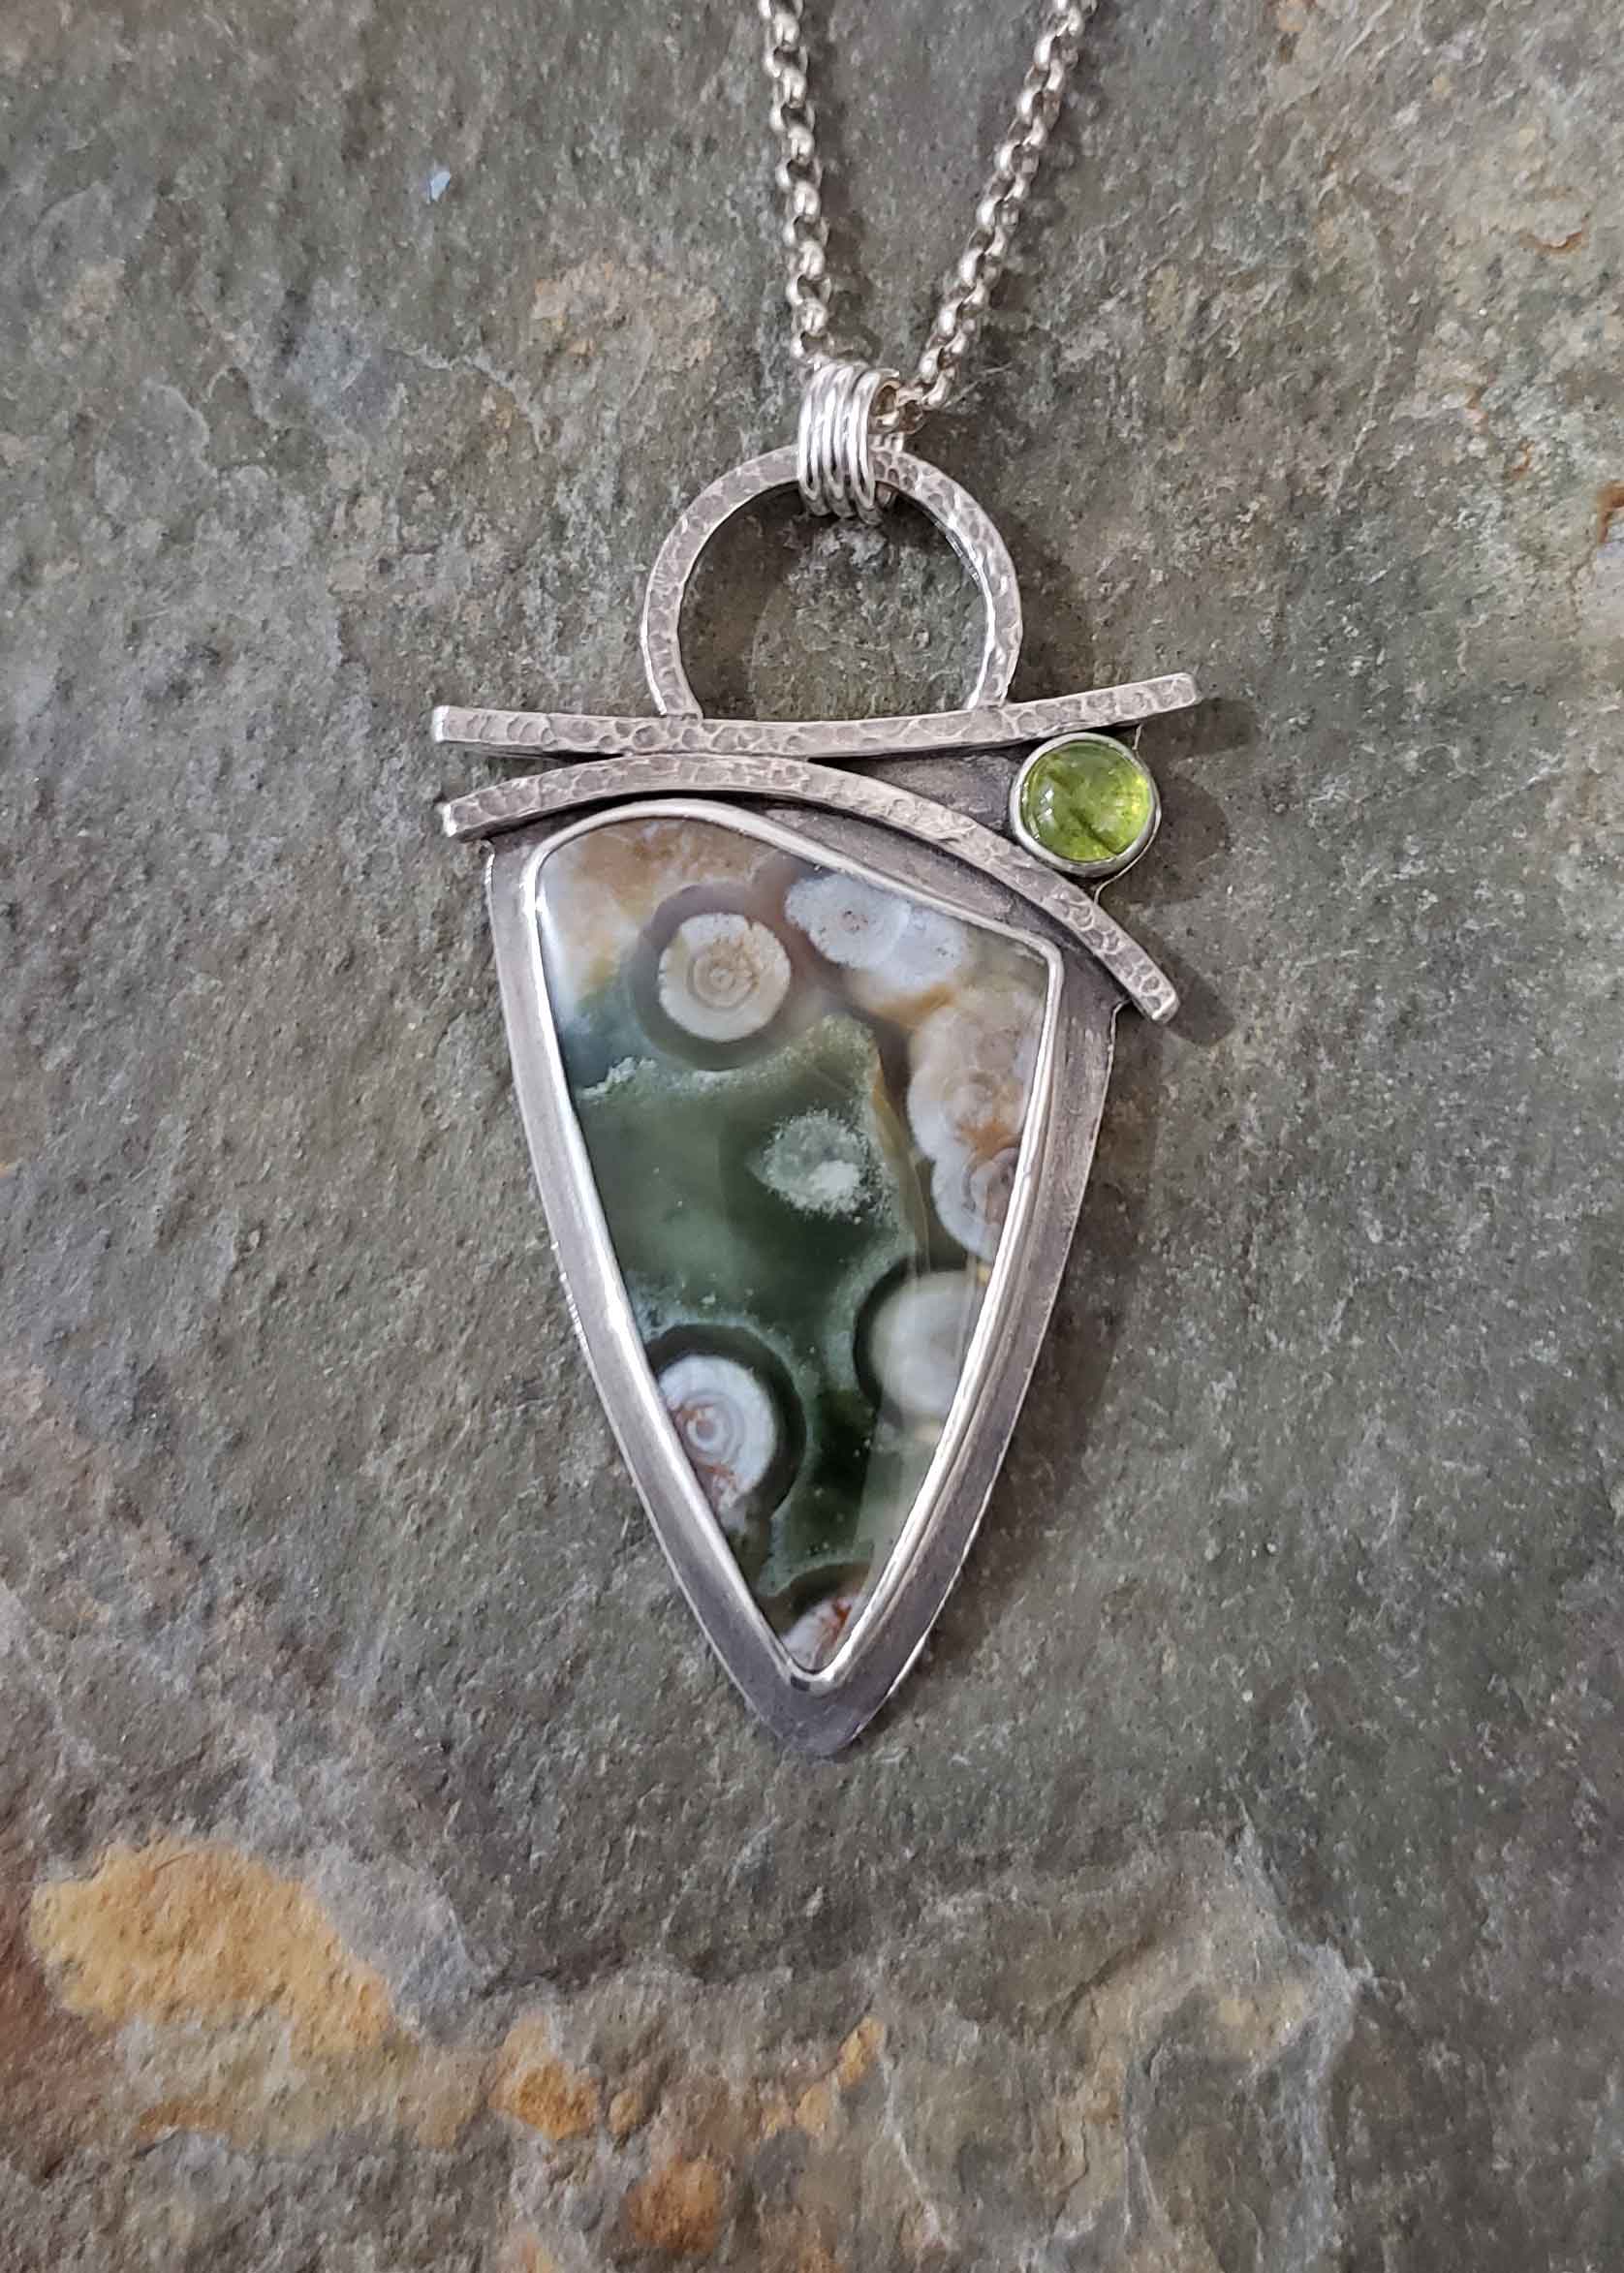 Greens, pinks and white in this silver pendant by Dona Miller.